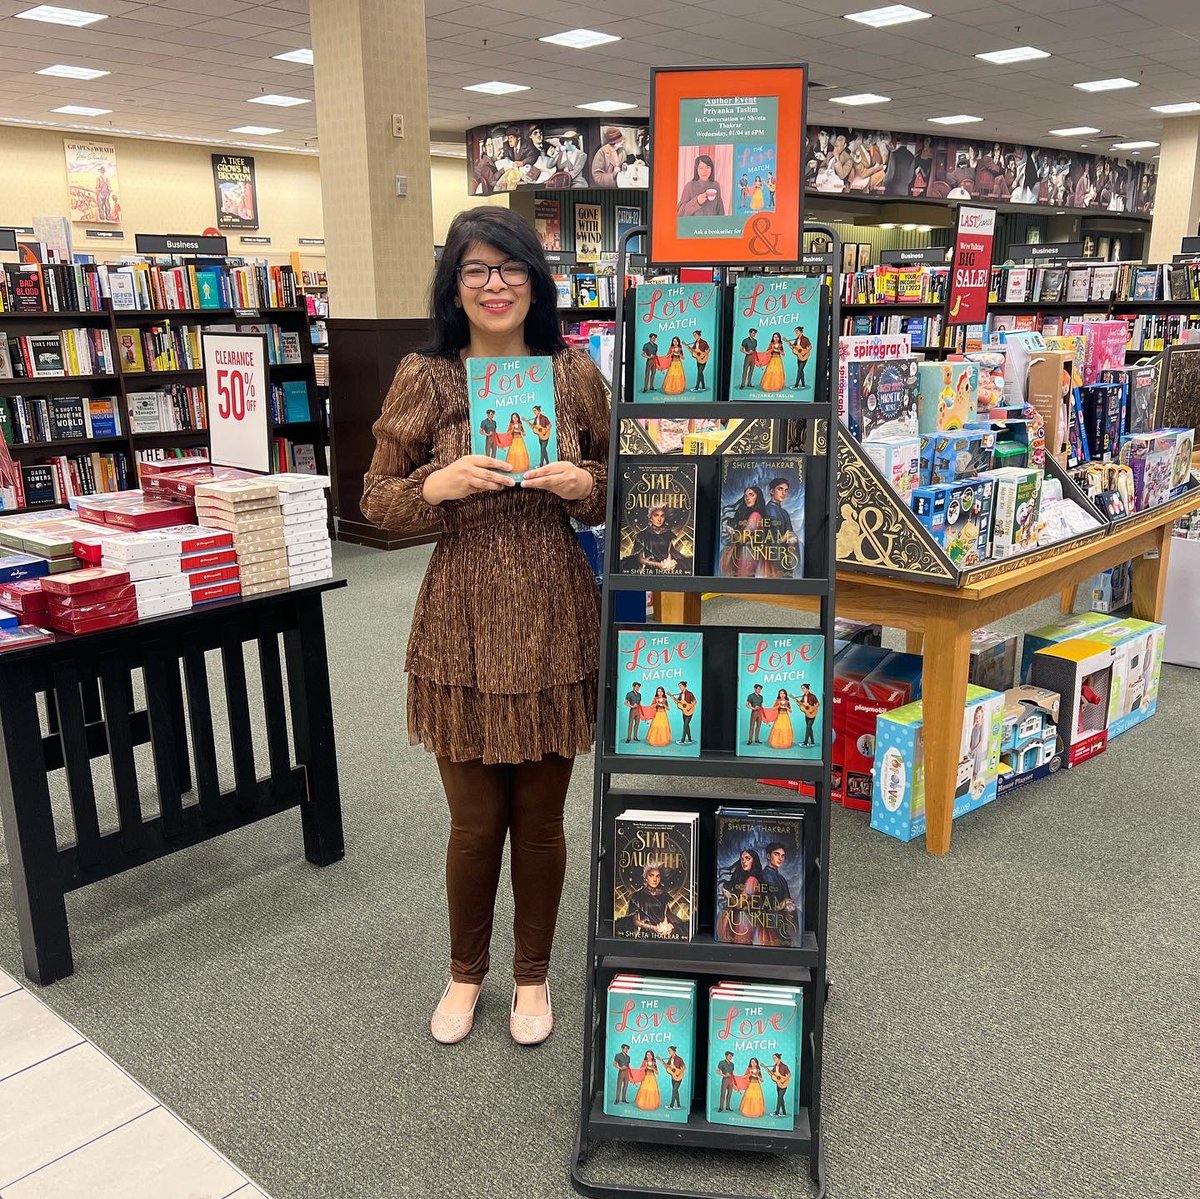 I had my first in person launch event last night and it was so lovely! Thank you to the sweet folks at @bn_neshaminy and the incomparably talented @ShvetaThakrar for making this debut author’s day so special! You can get SIGNED copies of #TheLoveMatch from them!